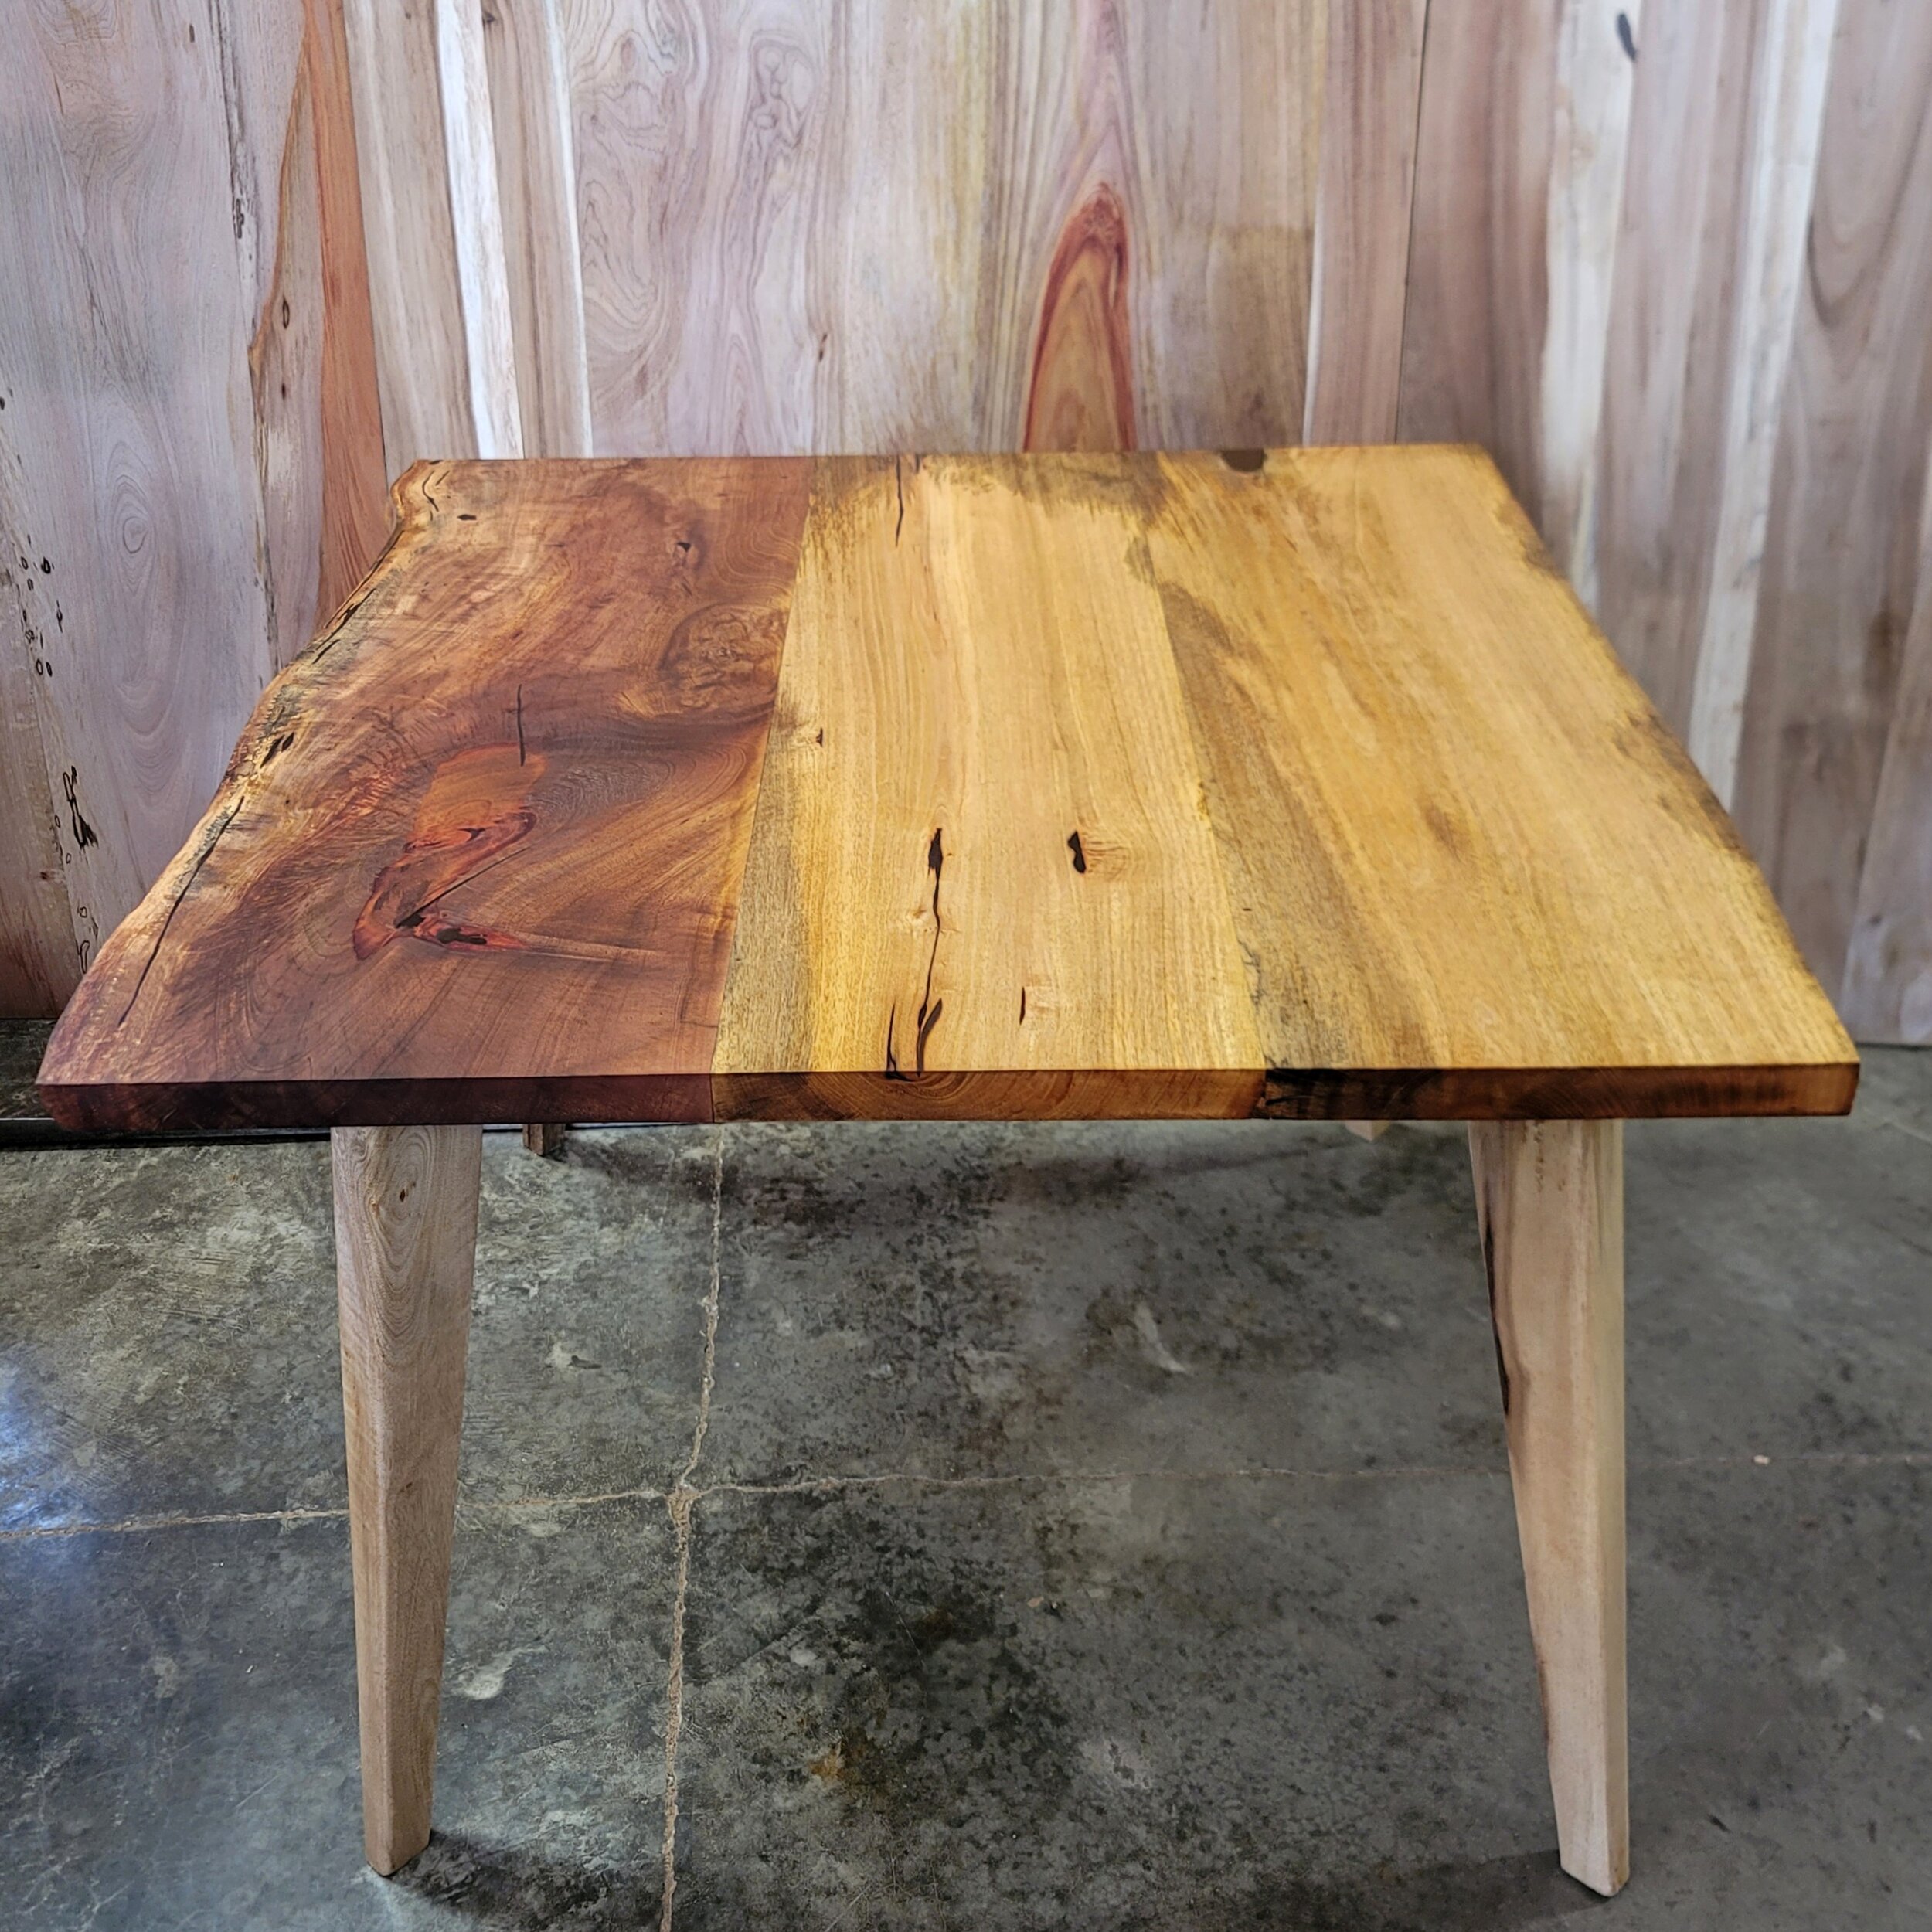 Pith Square Table (gallery 2)-2.jpg